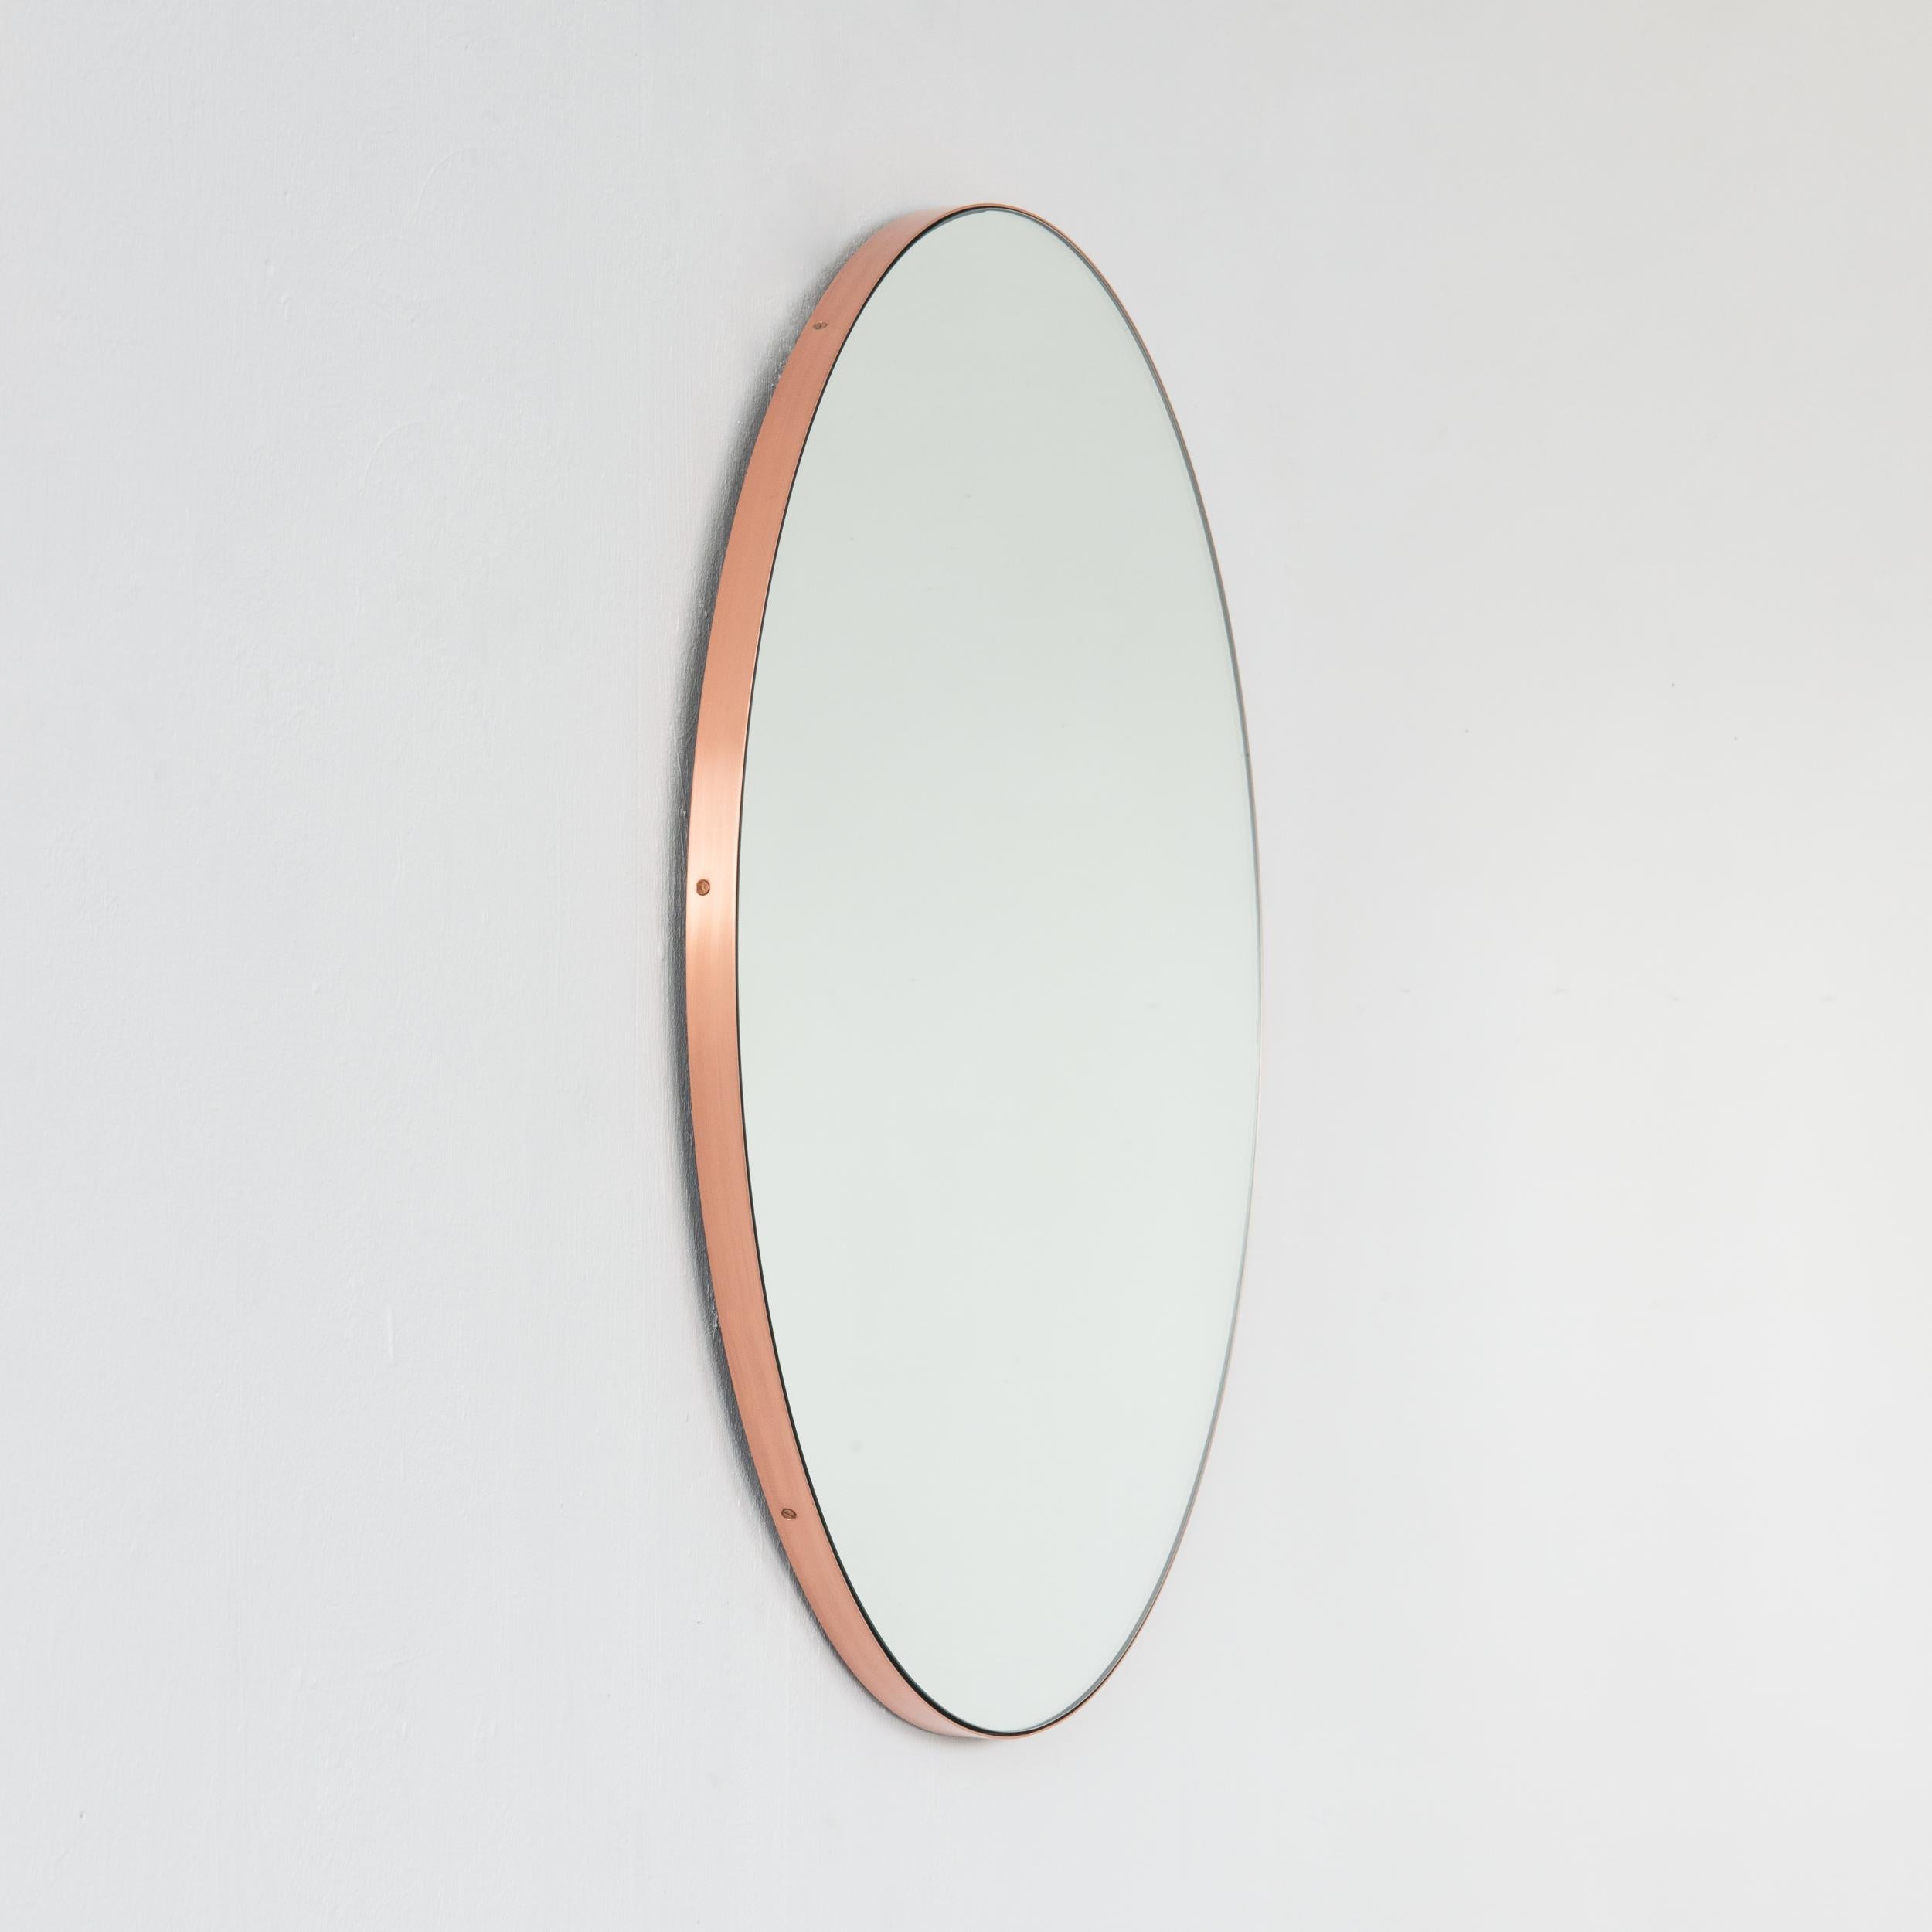 Orbis Round Contemporary Mirror with Brushed Copper Frame, XL In New Condition For Sale In London, GB